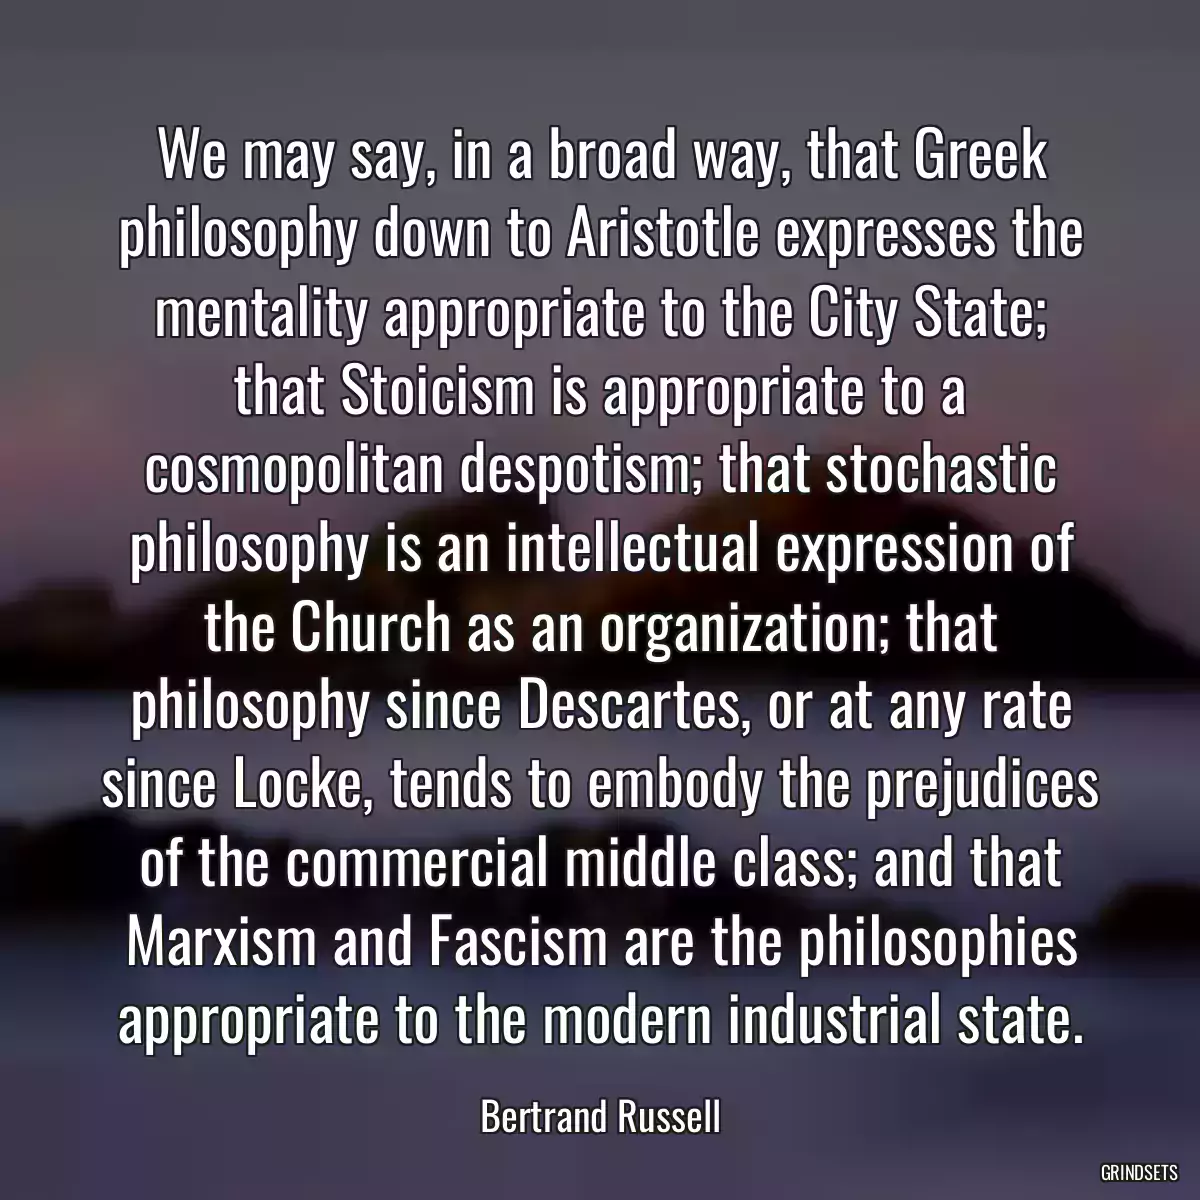 We may say, in a broad way, that Greek philosophy down to Aristotle expresses the mentality appropriate to the City State; that Stoicism is appropriate to a cosmopolitan despotism; that stochastic philosophy is an intellectual expression of the Church as an organization; that philosophy since Descartes, or at any rate since Locke, tends to embody the prejudices of the commercial middle class; and that Marxism and Fascism are the philosophies appropriate to the modern industrial state.